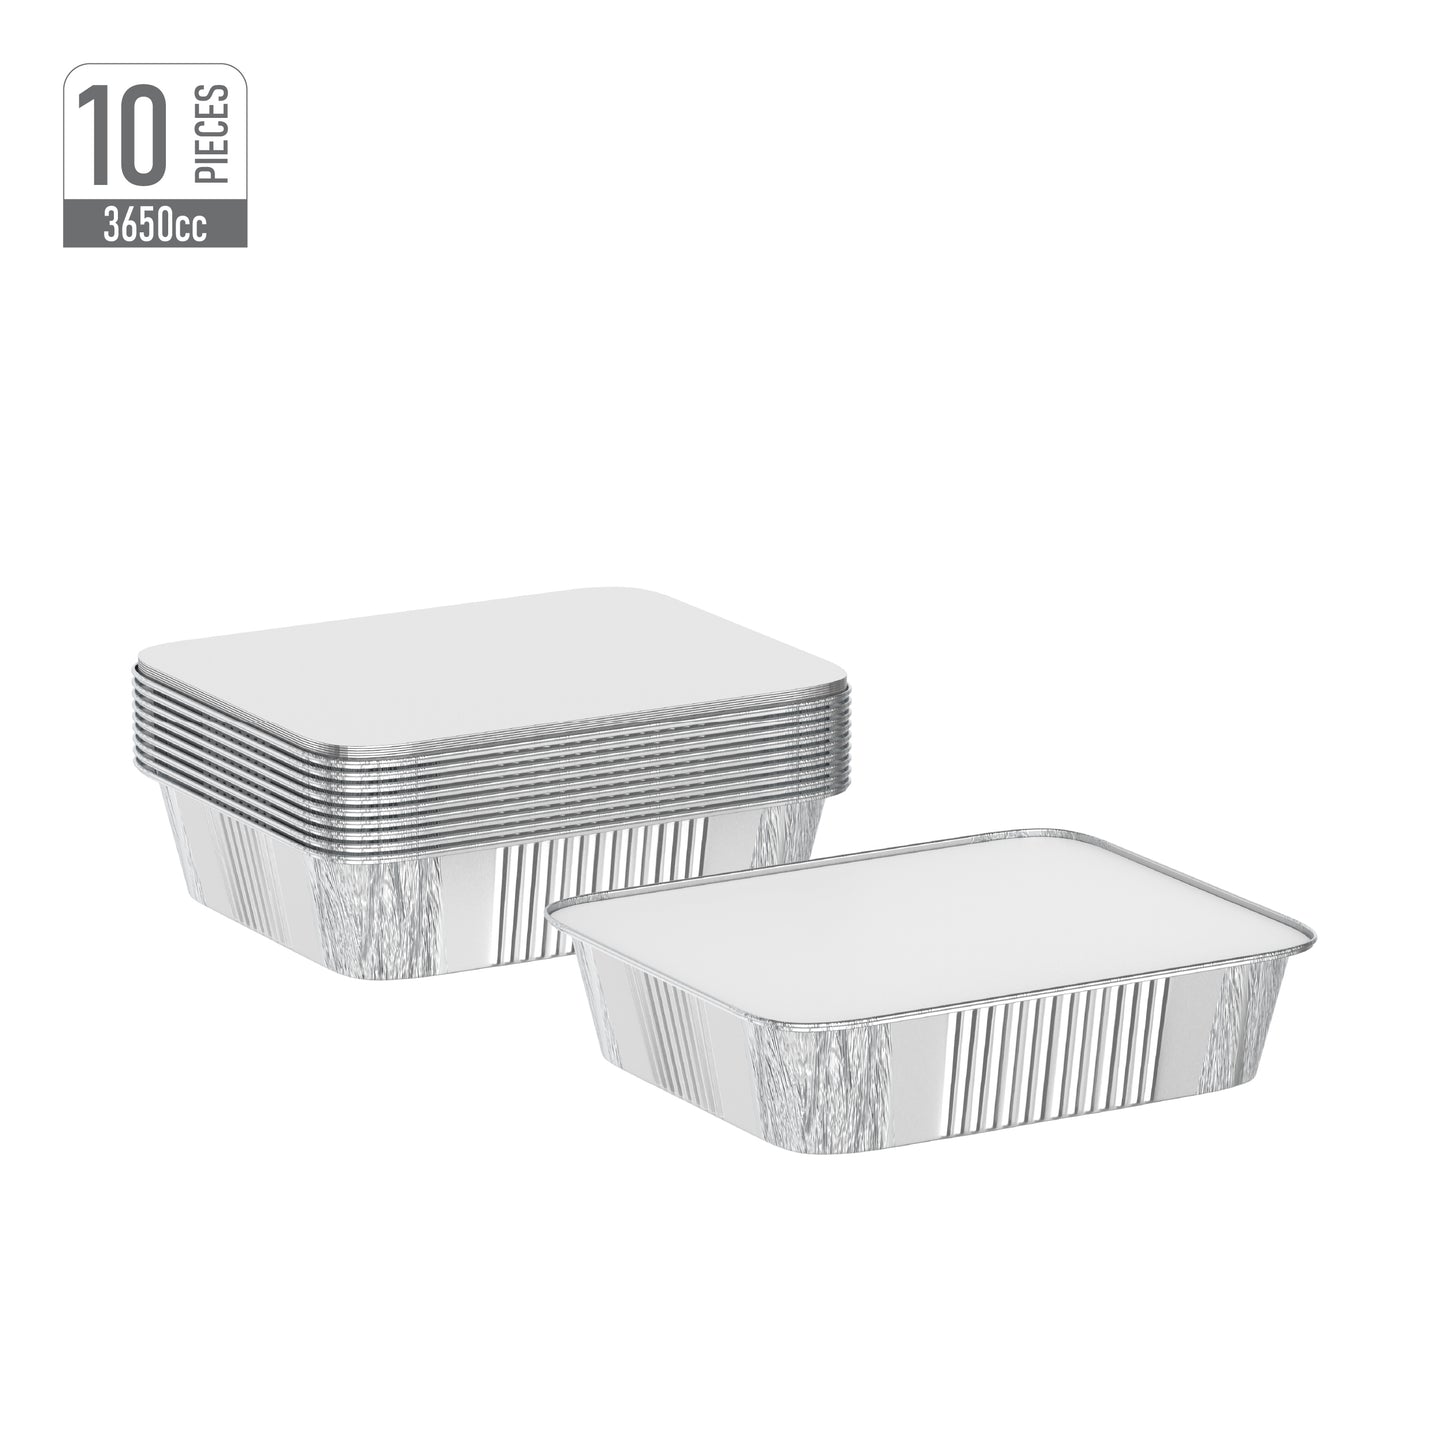 3650 cc Pack of 10 Aluminium Containers with Lids